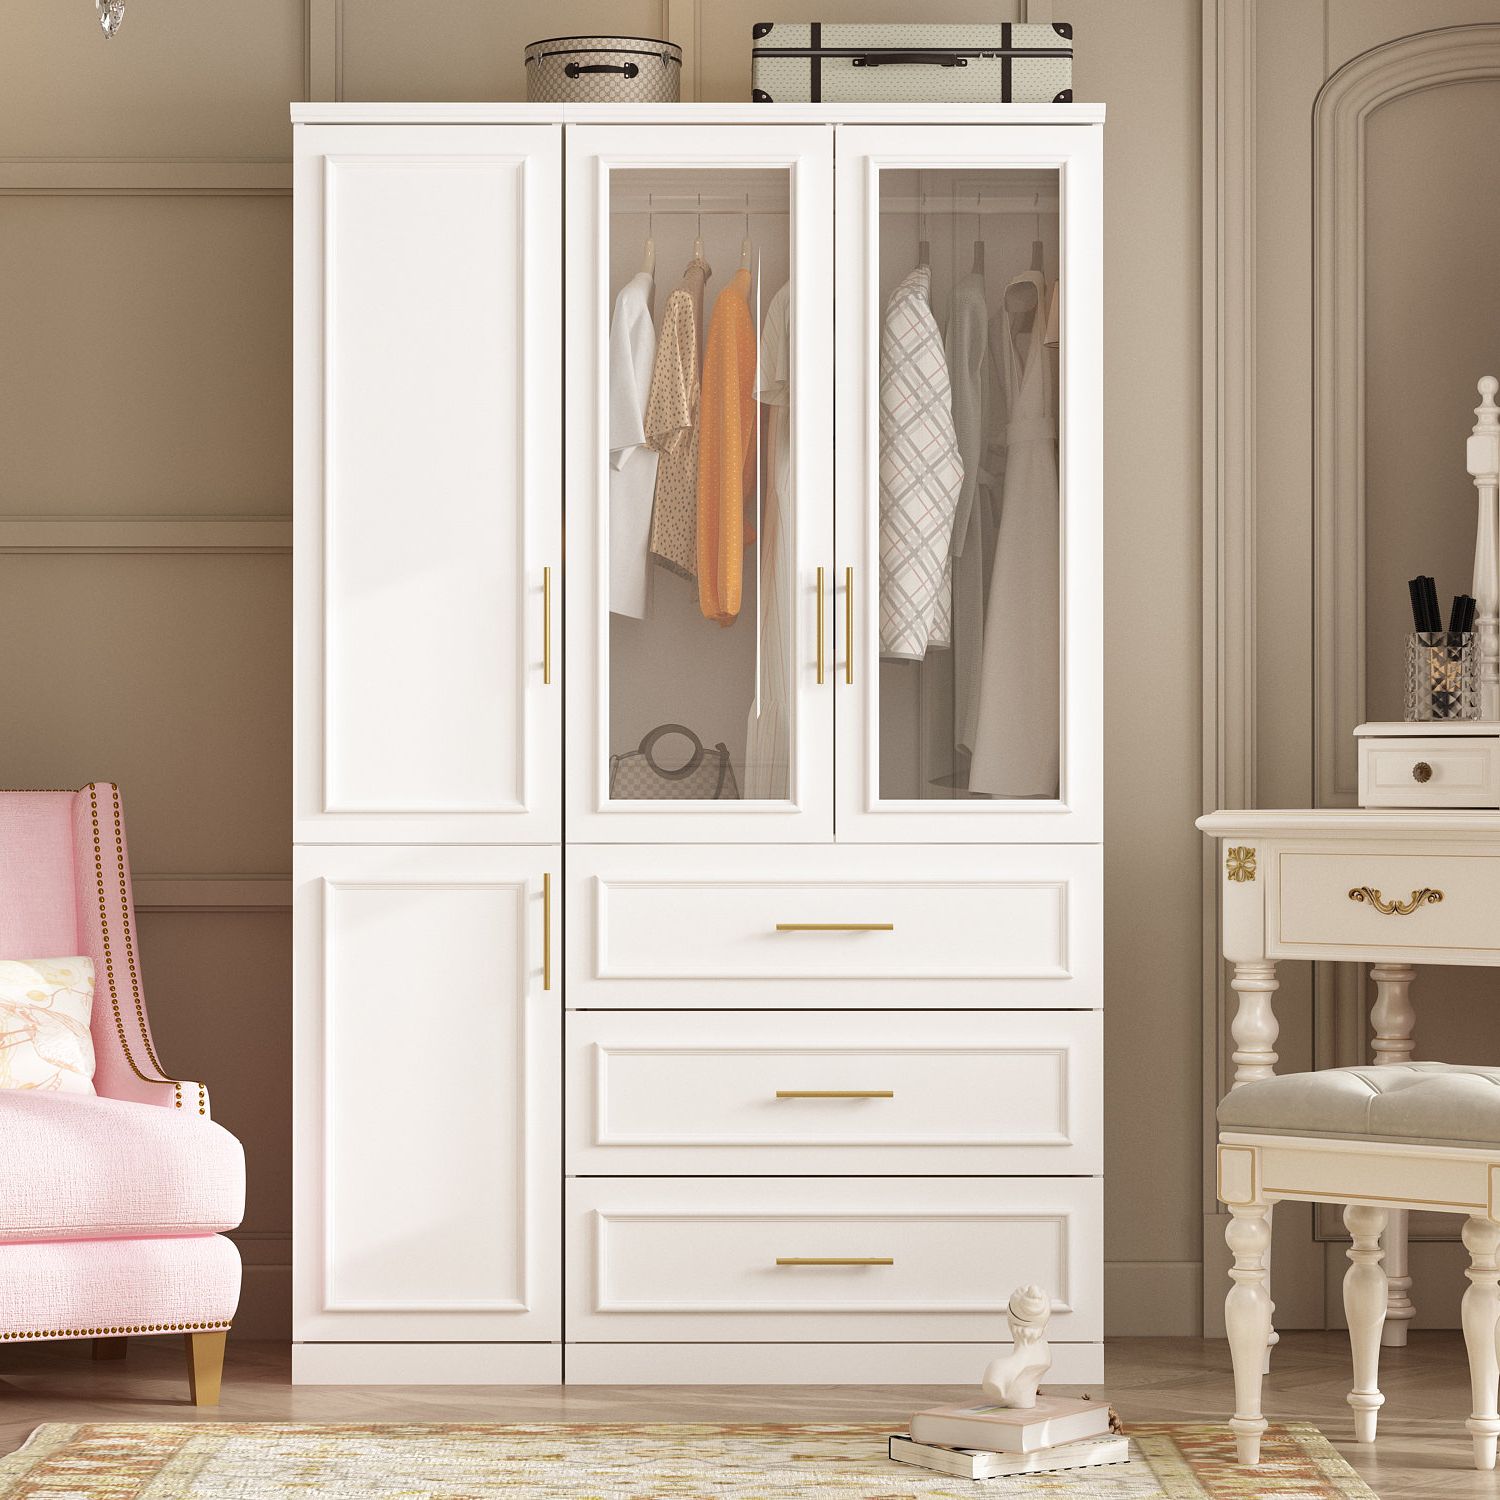 Latitude Run® Armoire | Wayfair Intended For White Wardrobes With Drawers (Gallery 7 of 20)